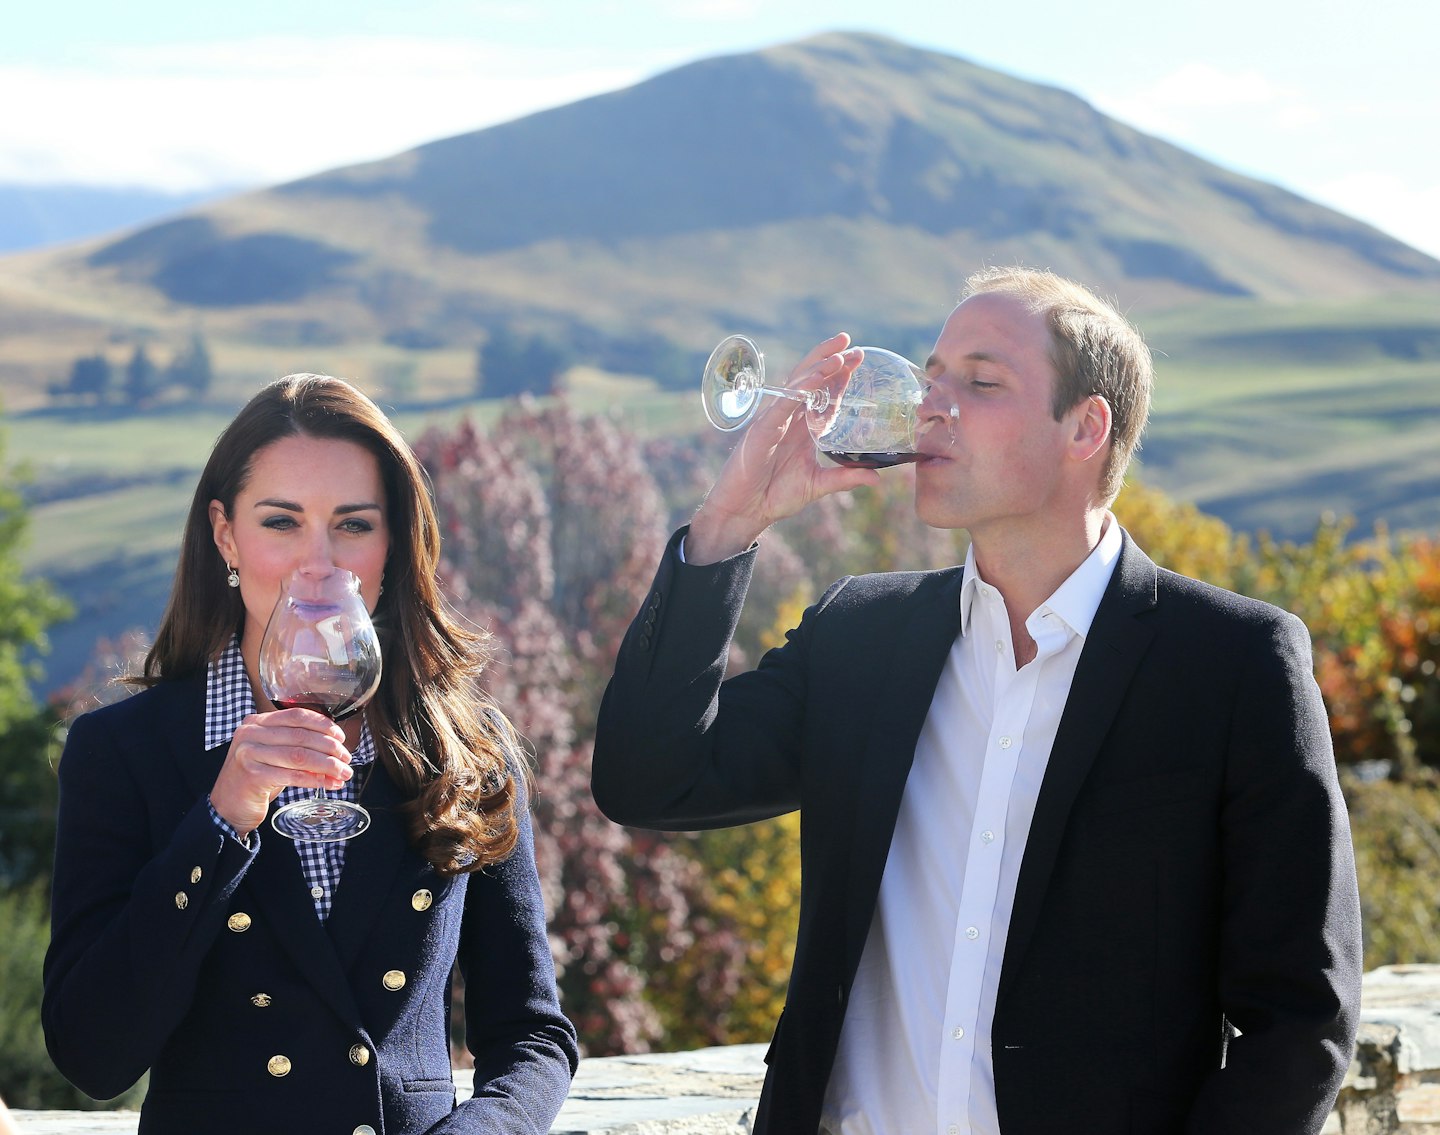 Kate Middleton and Prince William drinking wine 